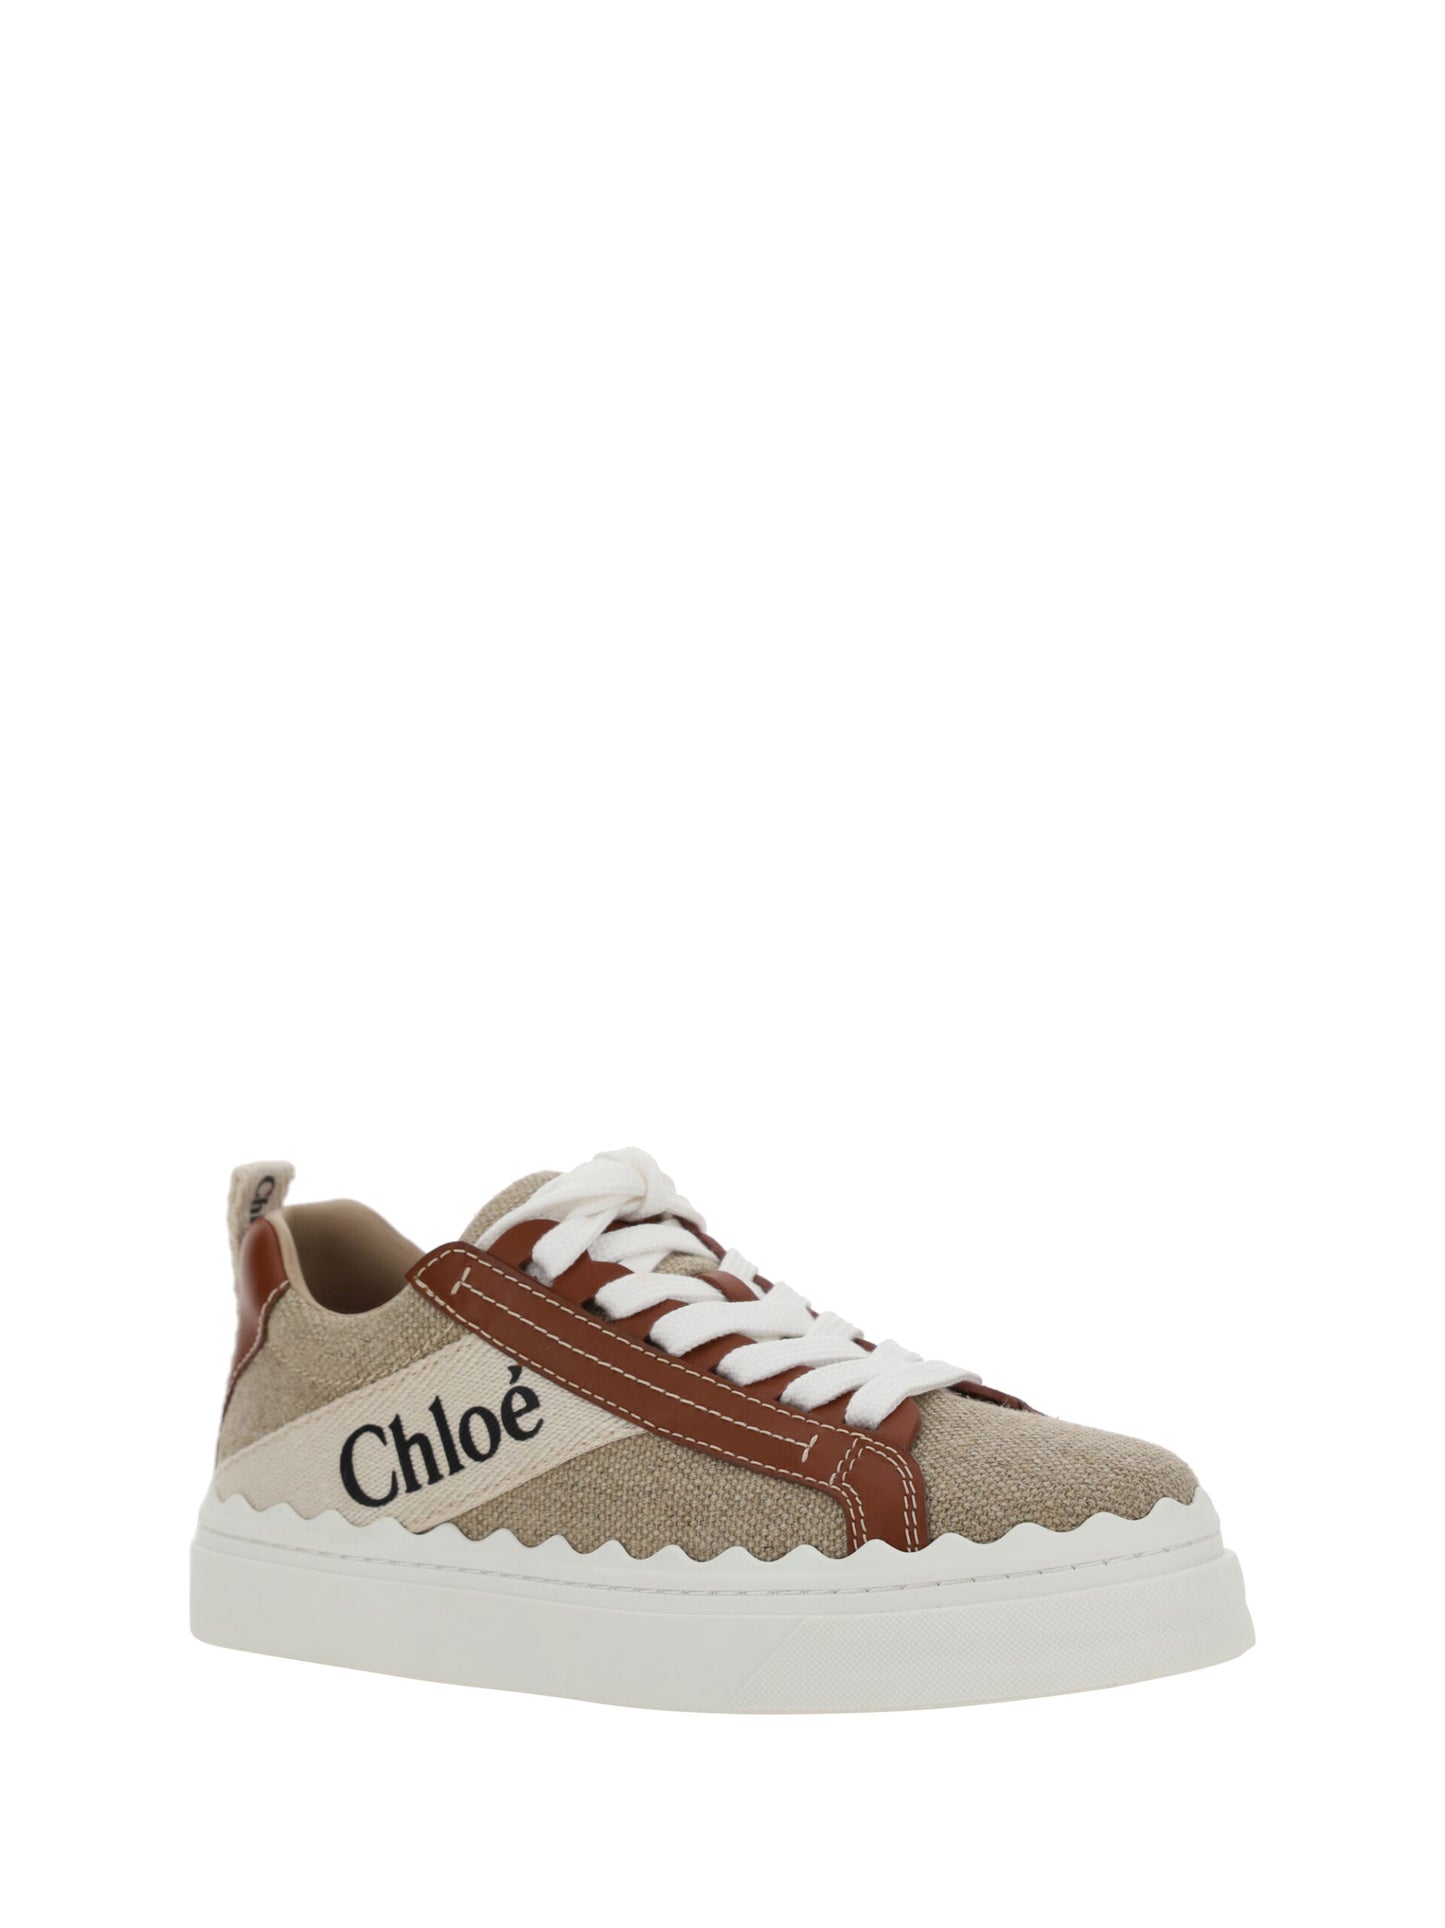 Exquisite Cotton & Calfskin Lace-Up Sneakers